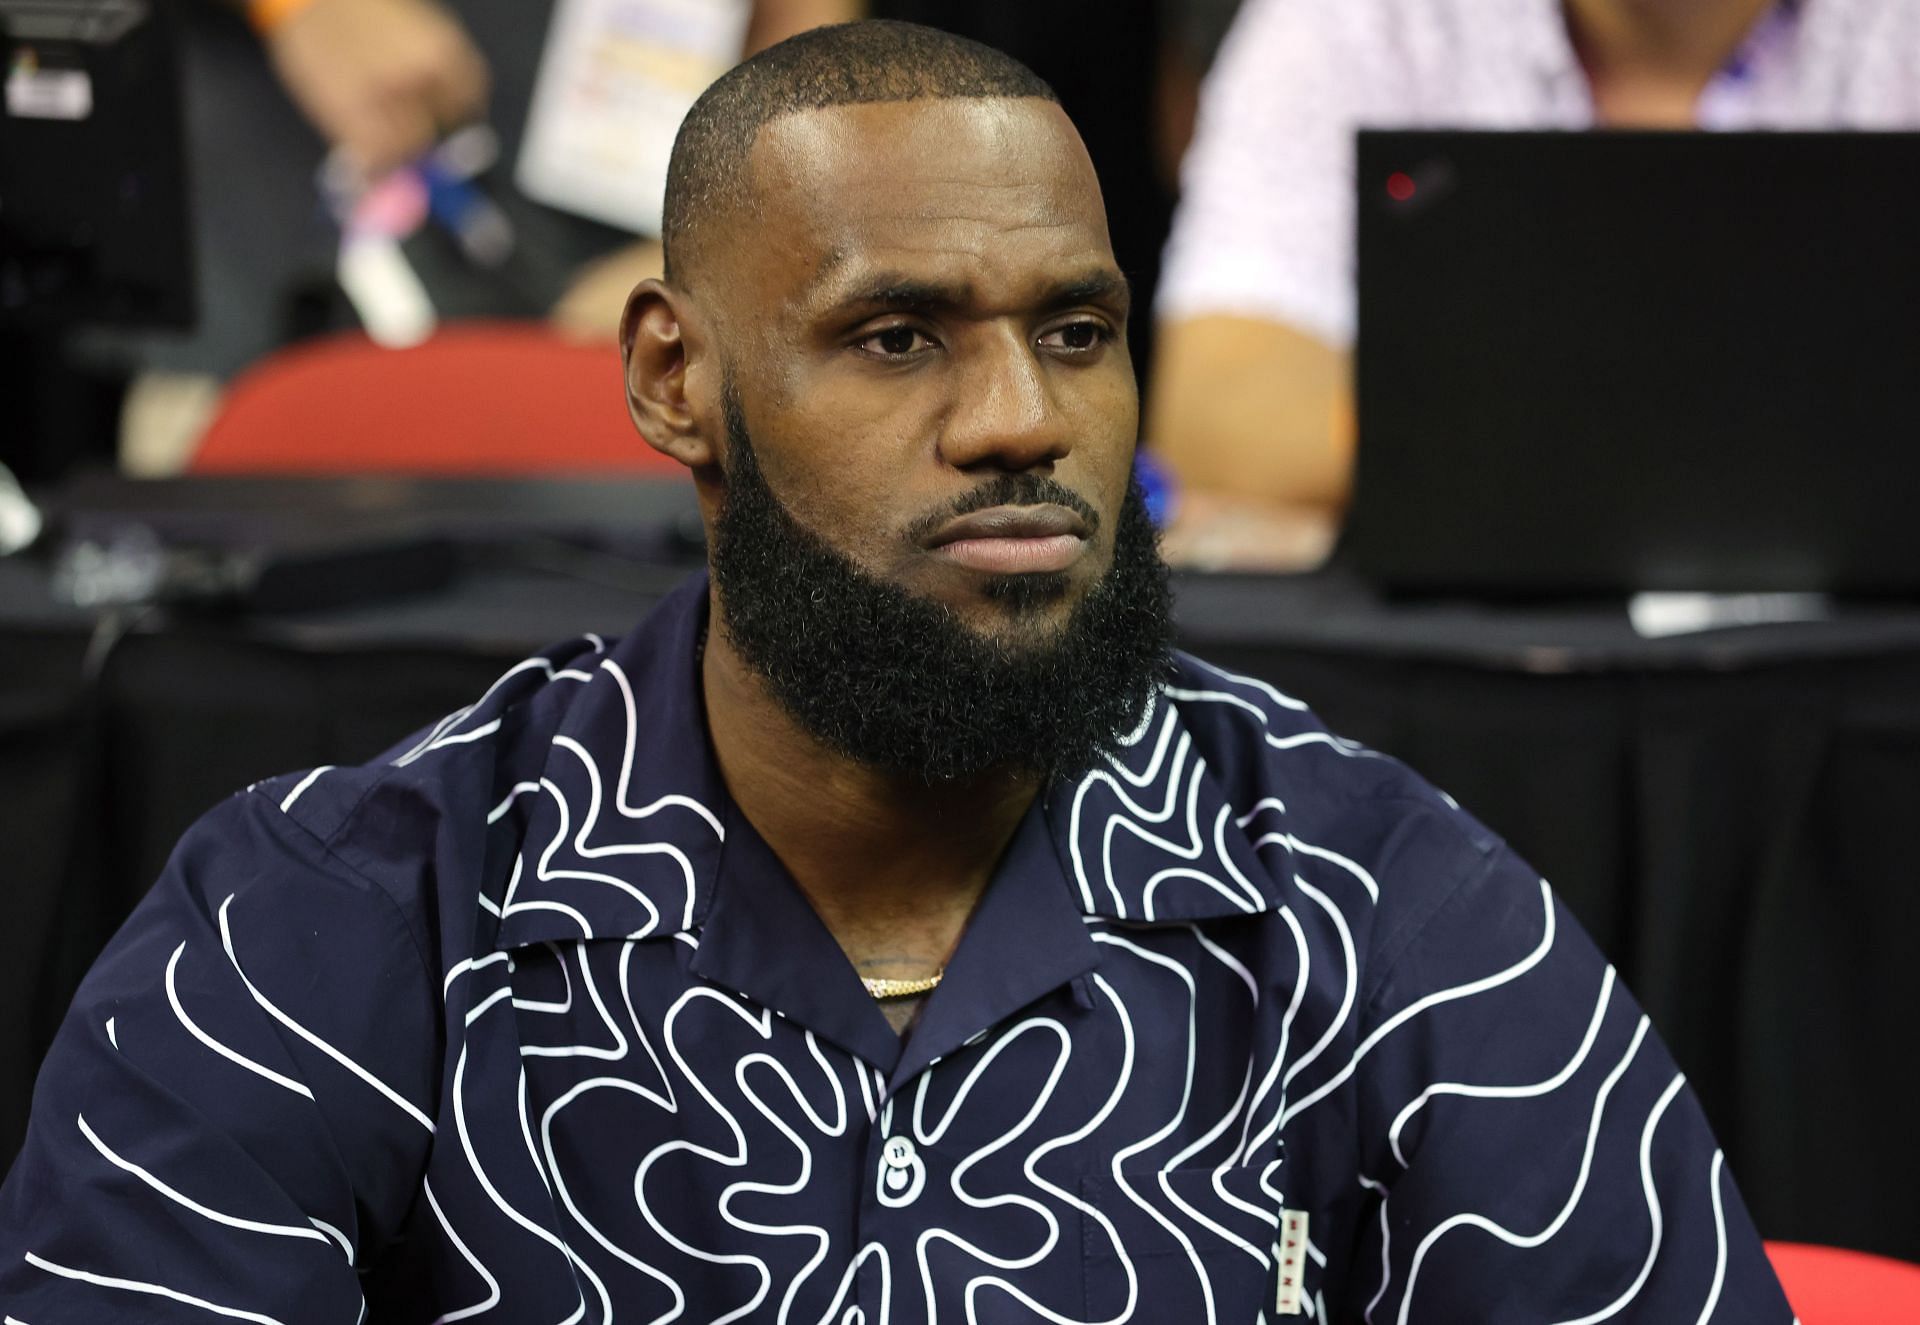 LeBron James of the LA Lakers attends at 2022 NBA Summer League game